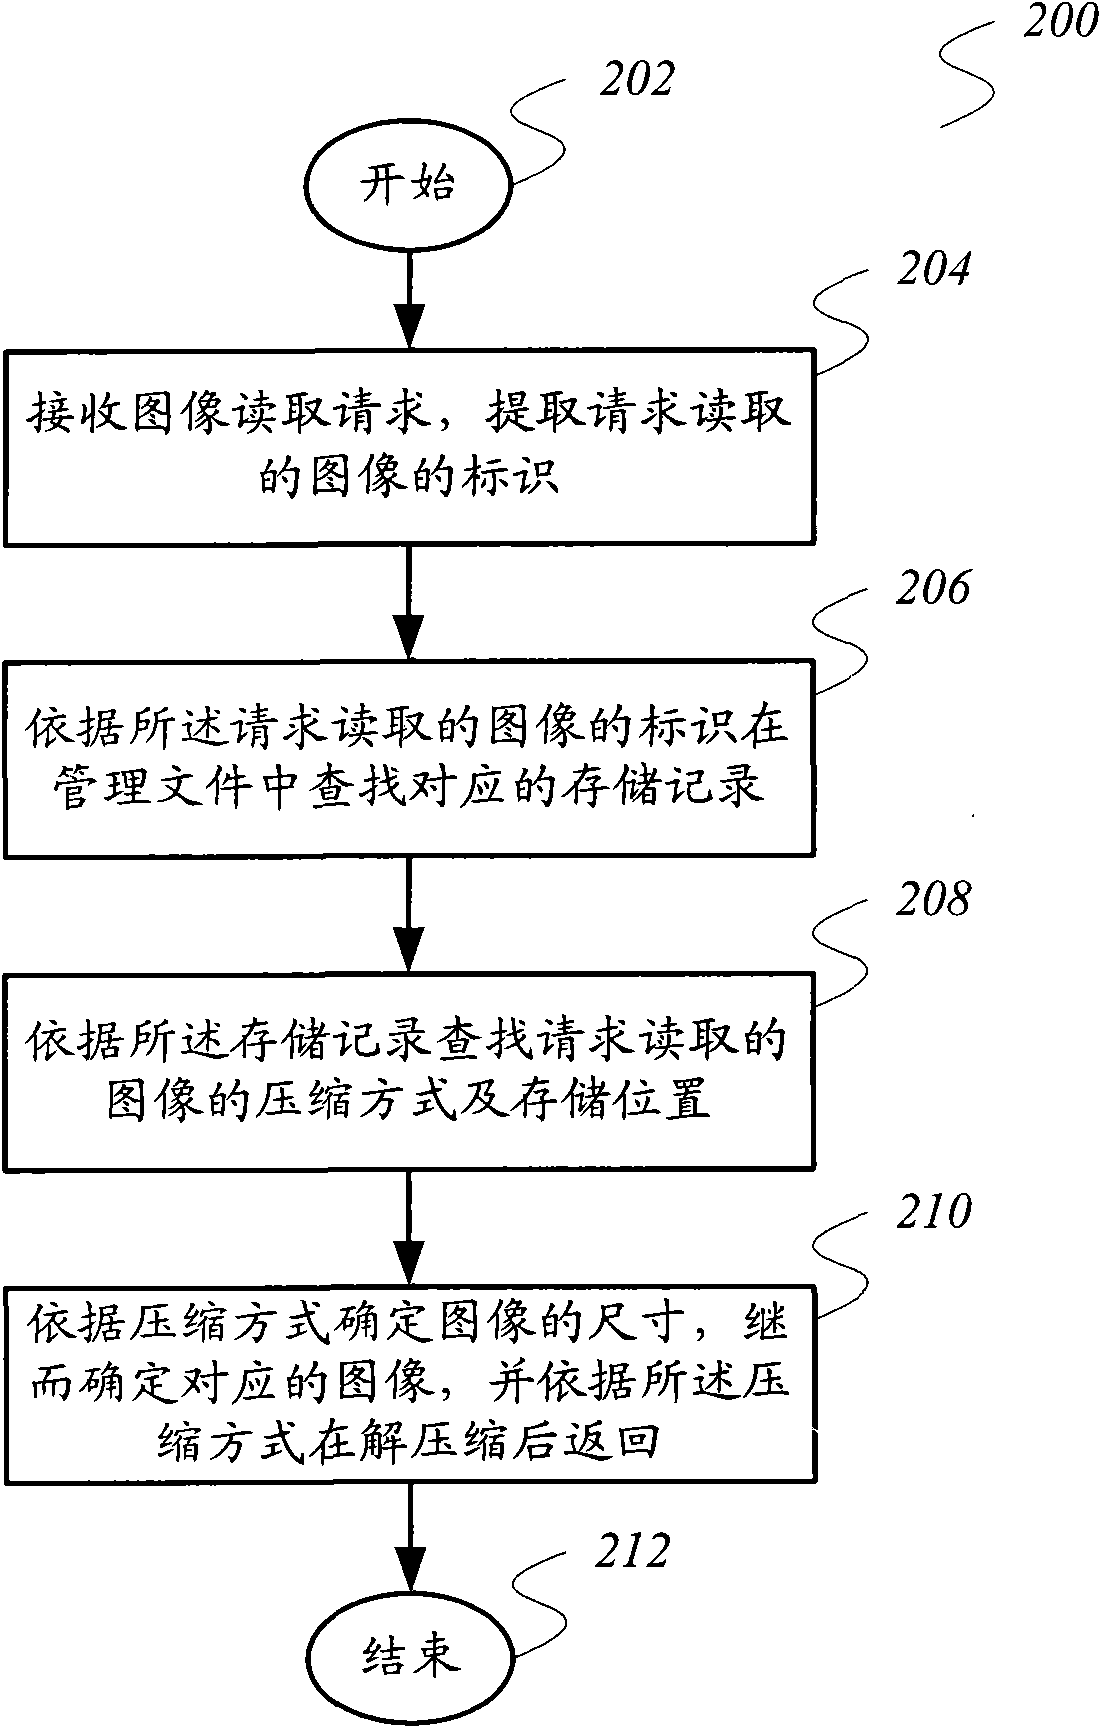 Image file management method and system